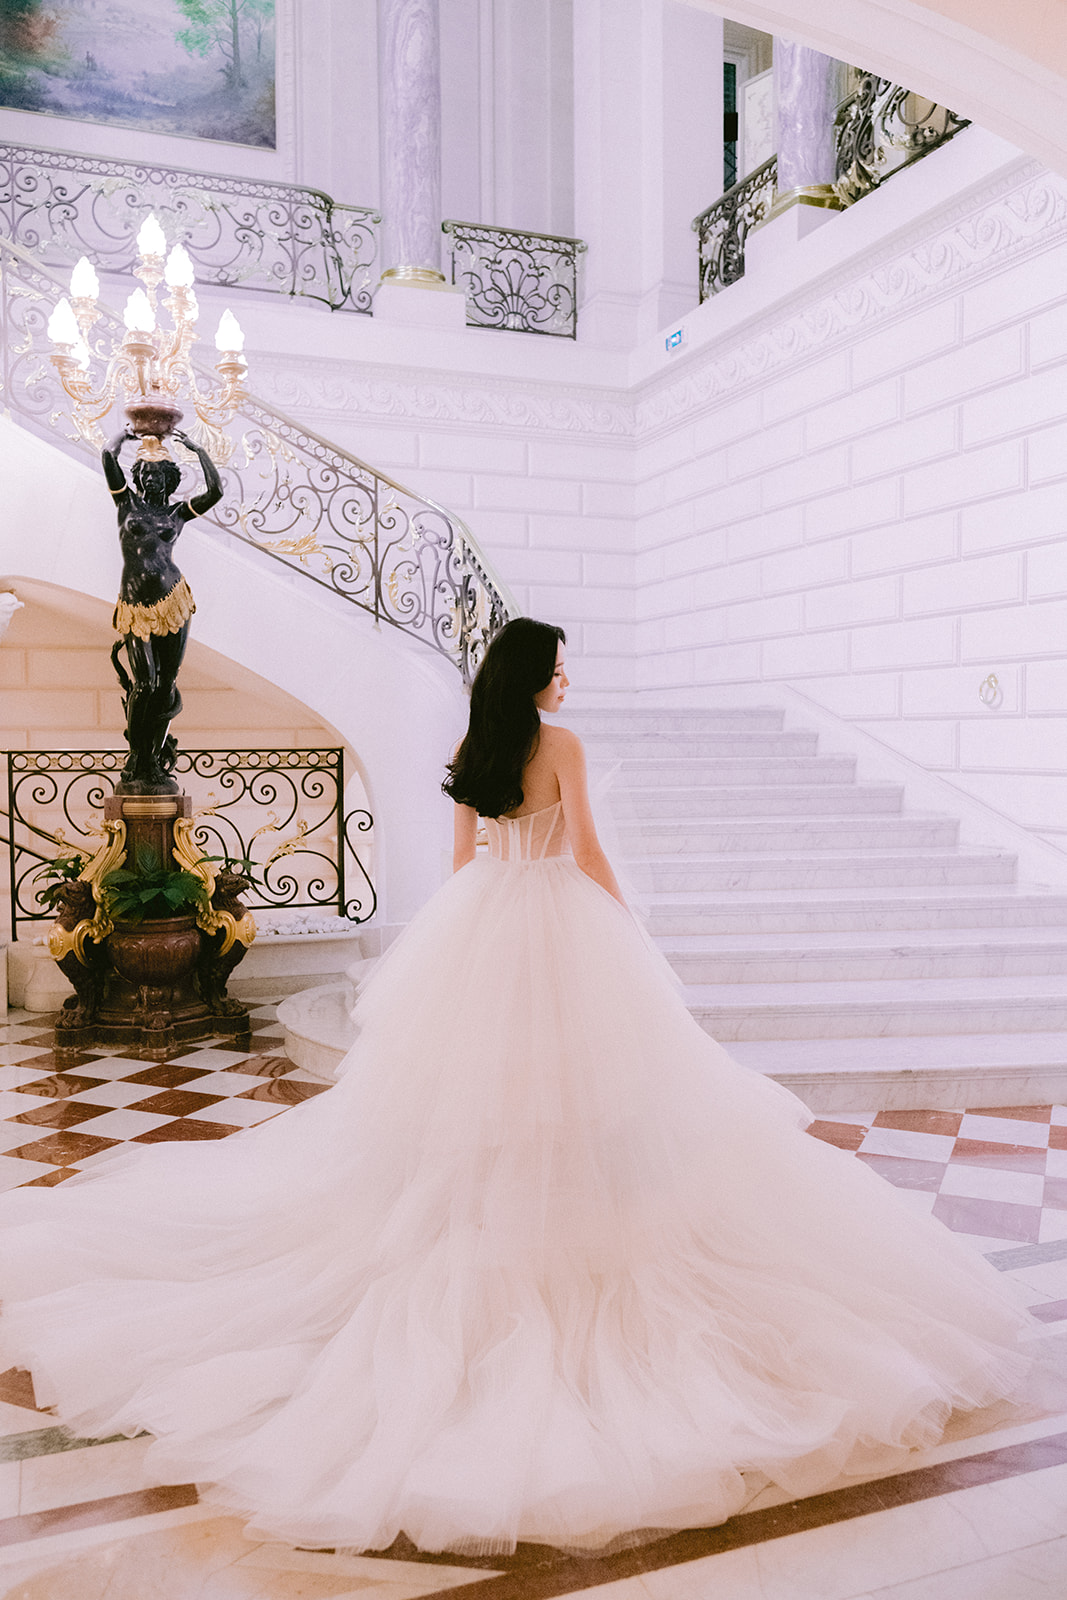 the bride poses in front of the stairs for the photo